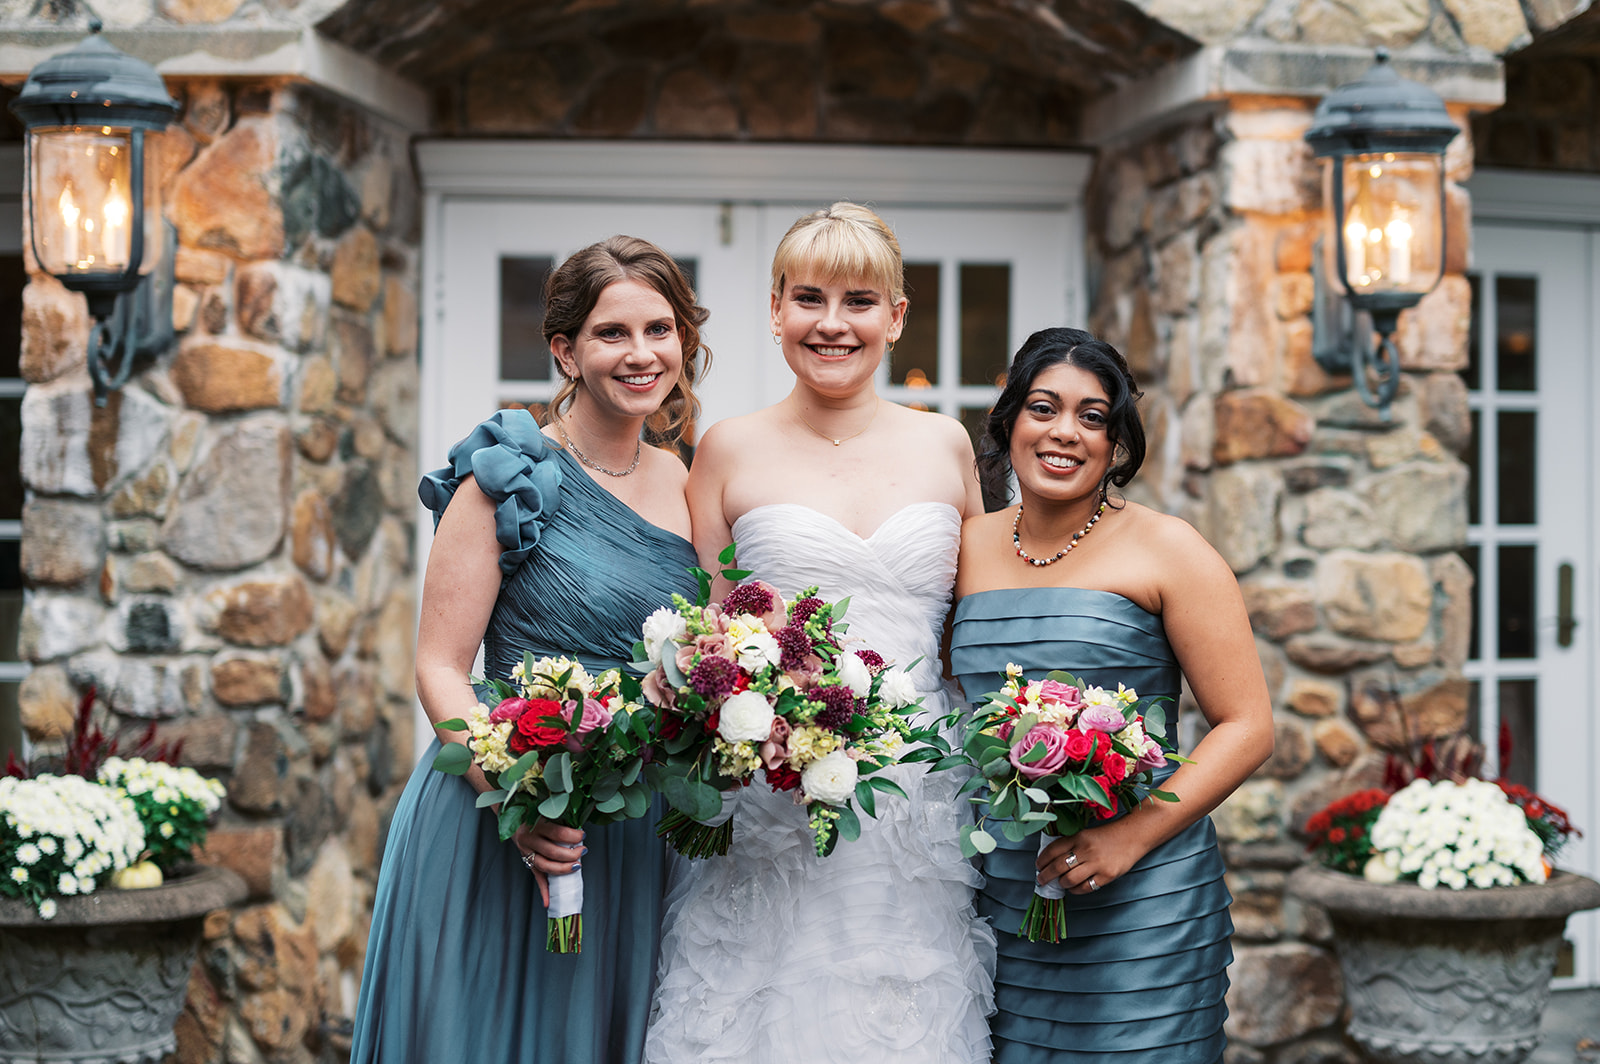 A bride stands with her 2 bridesmaids in front of stone columns holding colorful bouquets at an Olde Mill Inn Wedding